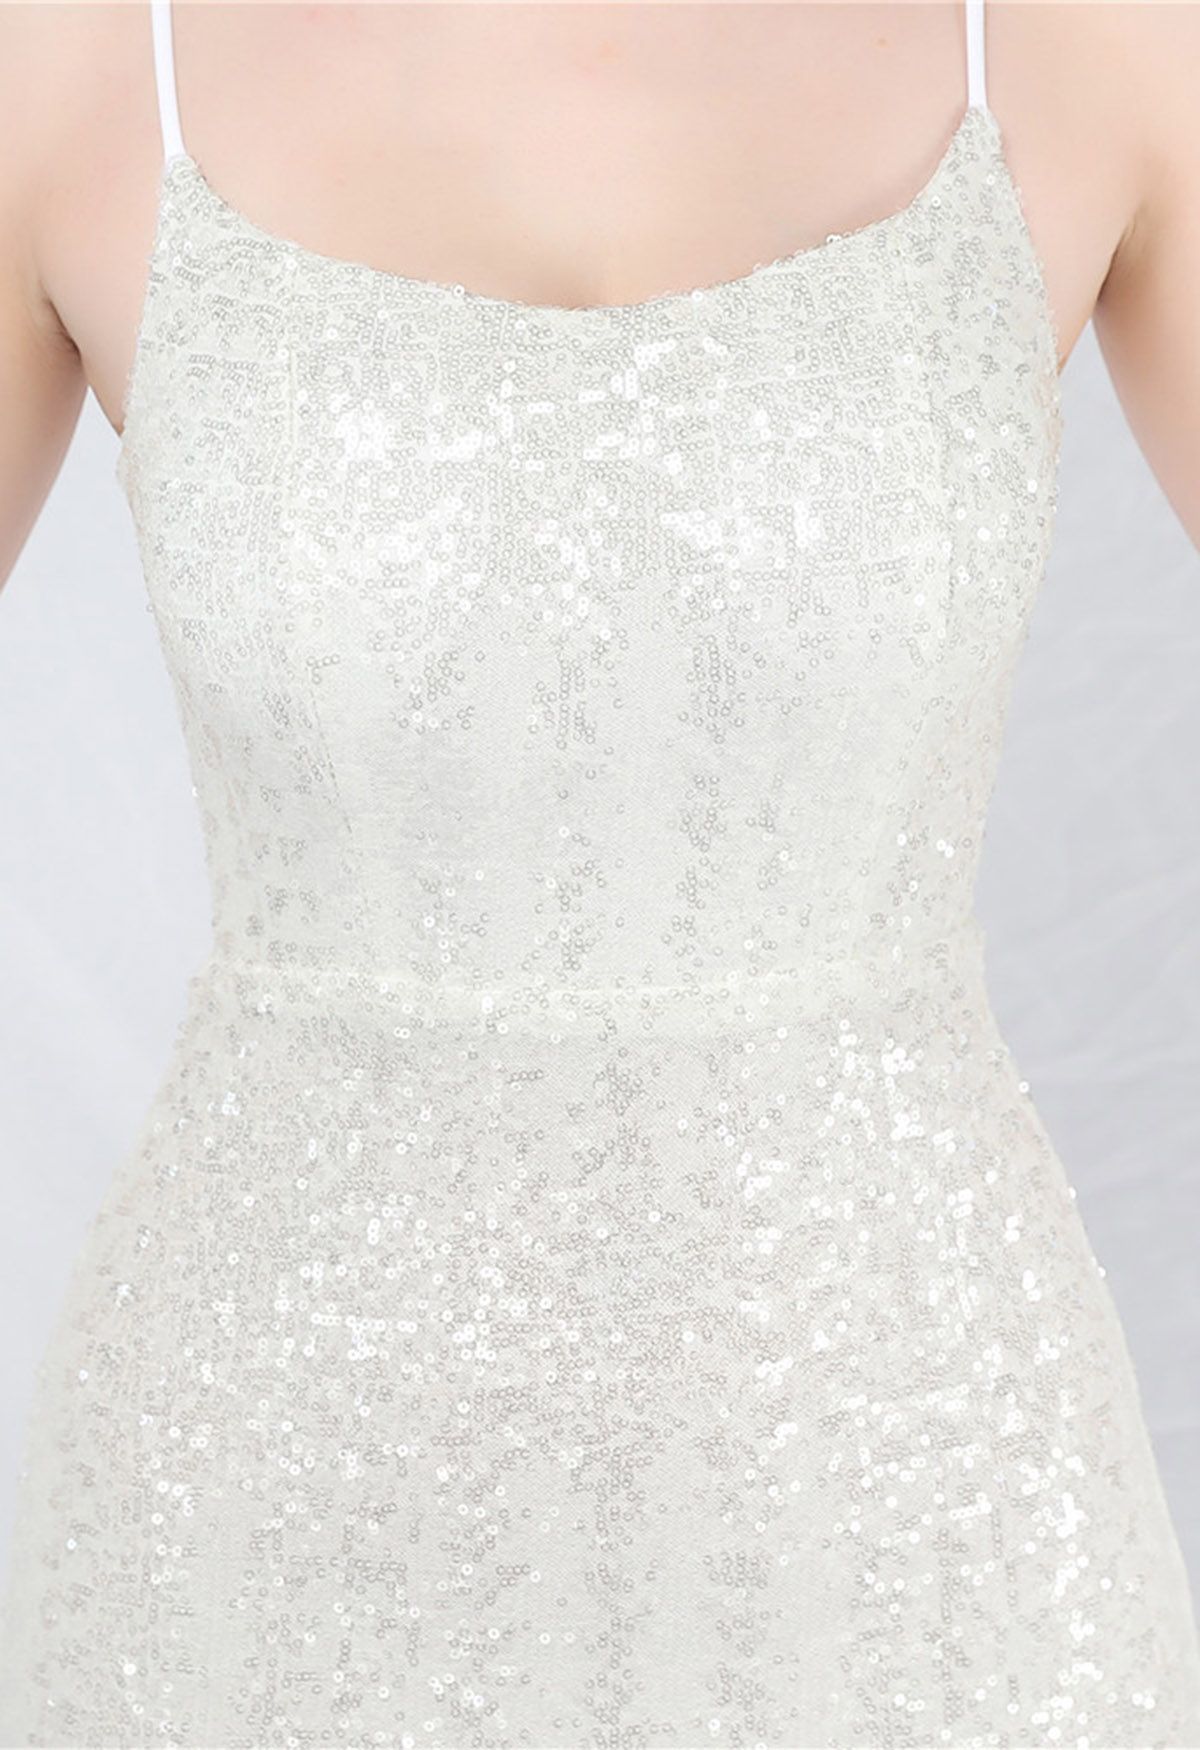 Fairytale Sequin Mermaid Cami Gown in White